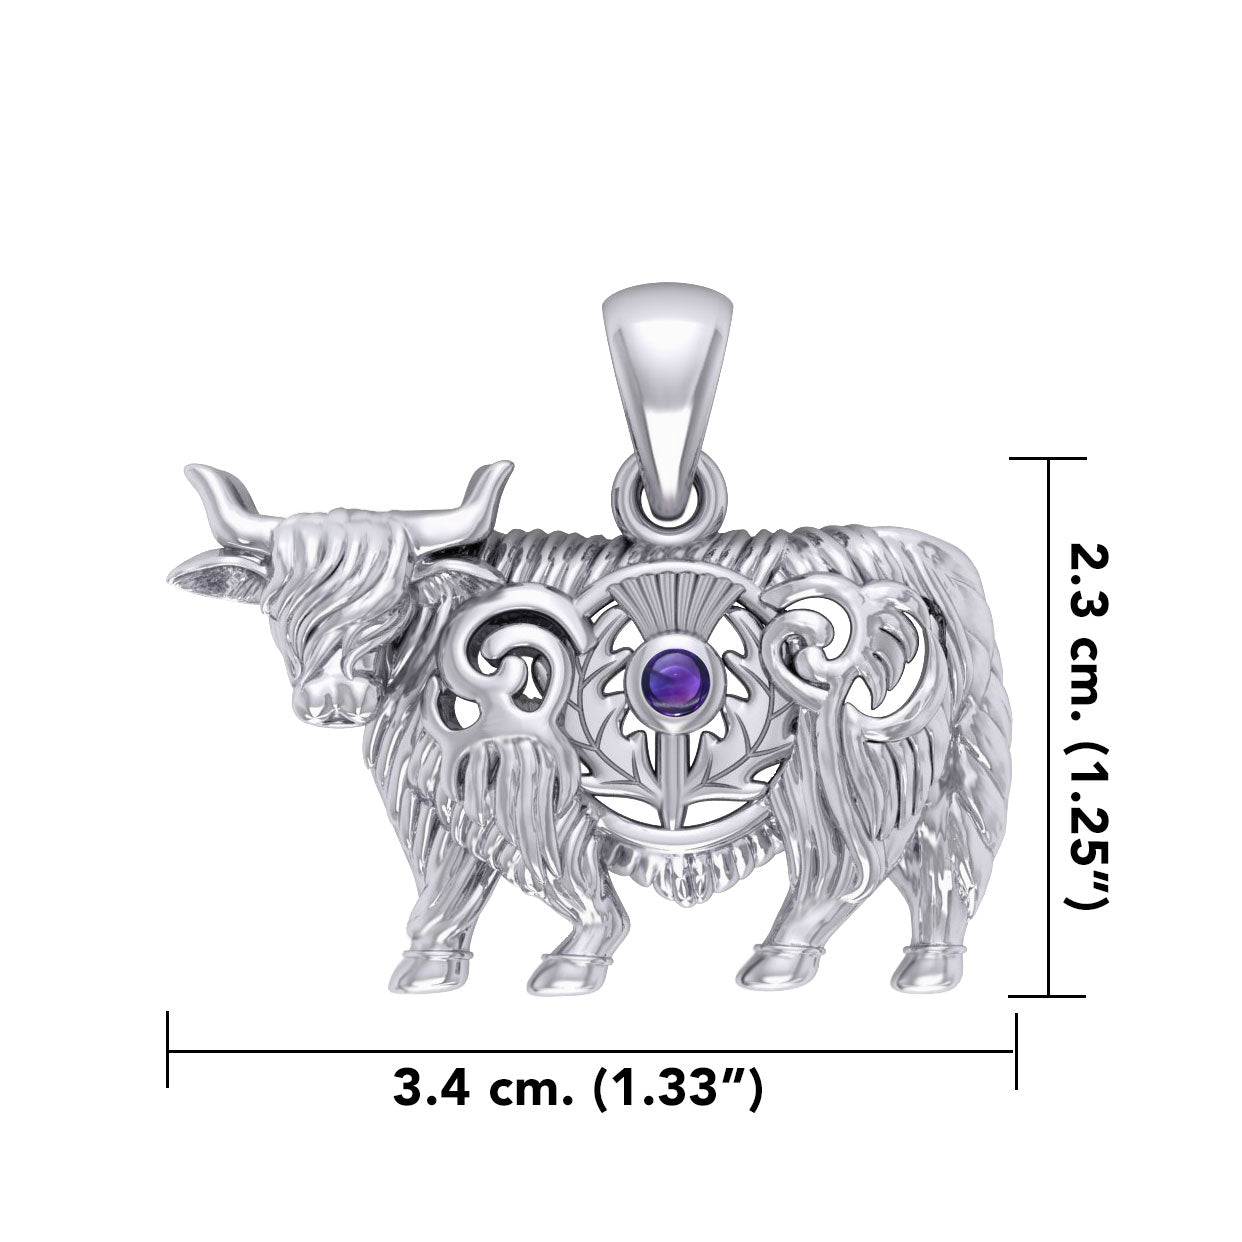 Highland Cow with Thistle and Gemstone Silver Pendant TPD6141